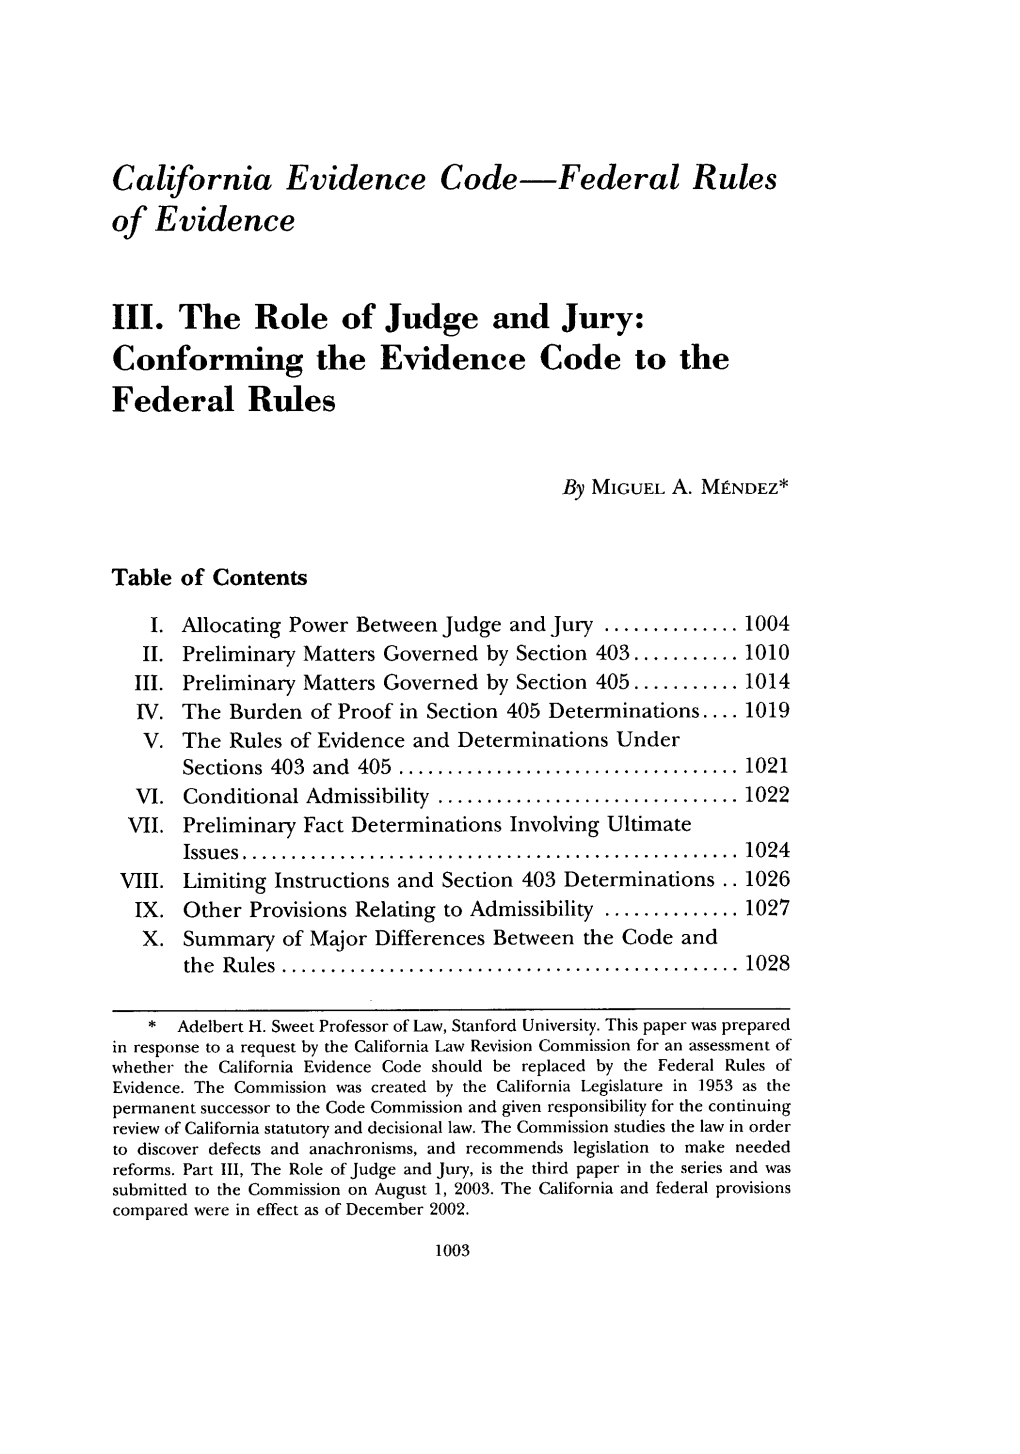 The Role of Judge and Jury: Conforming the Evidence Code to the Federal Rules